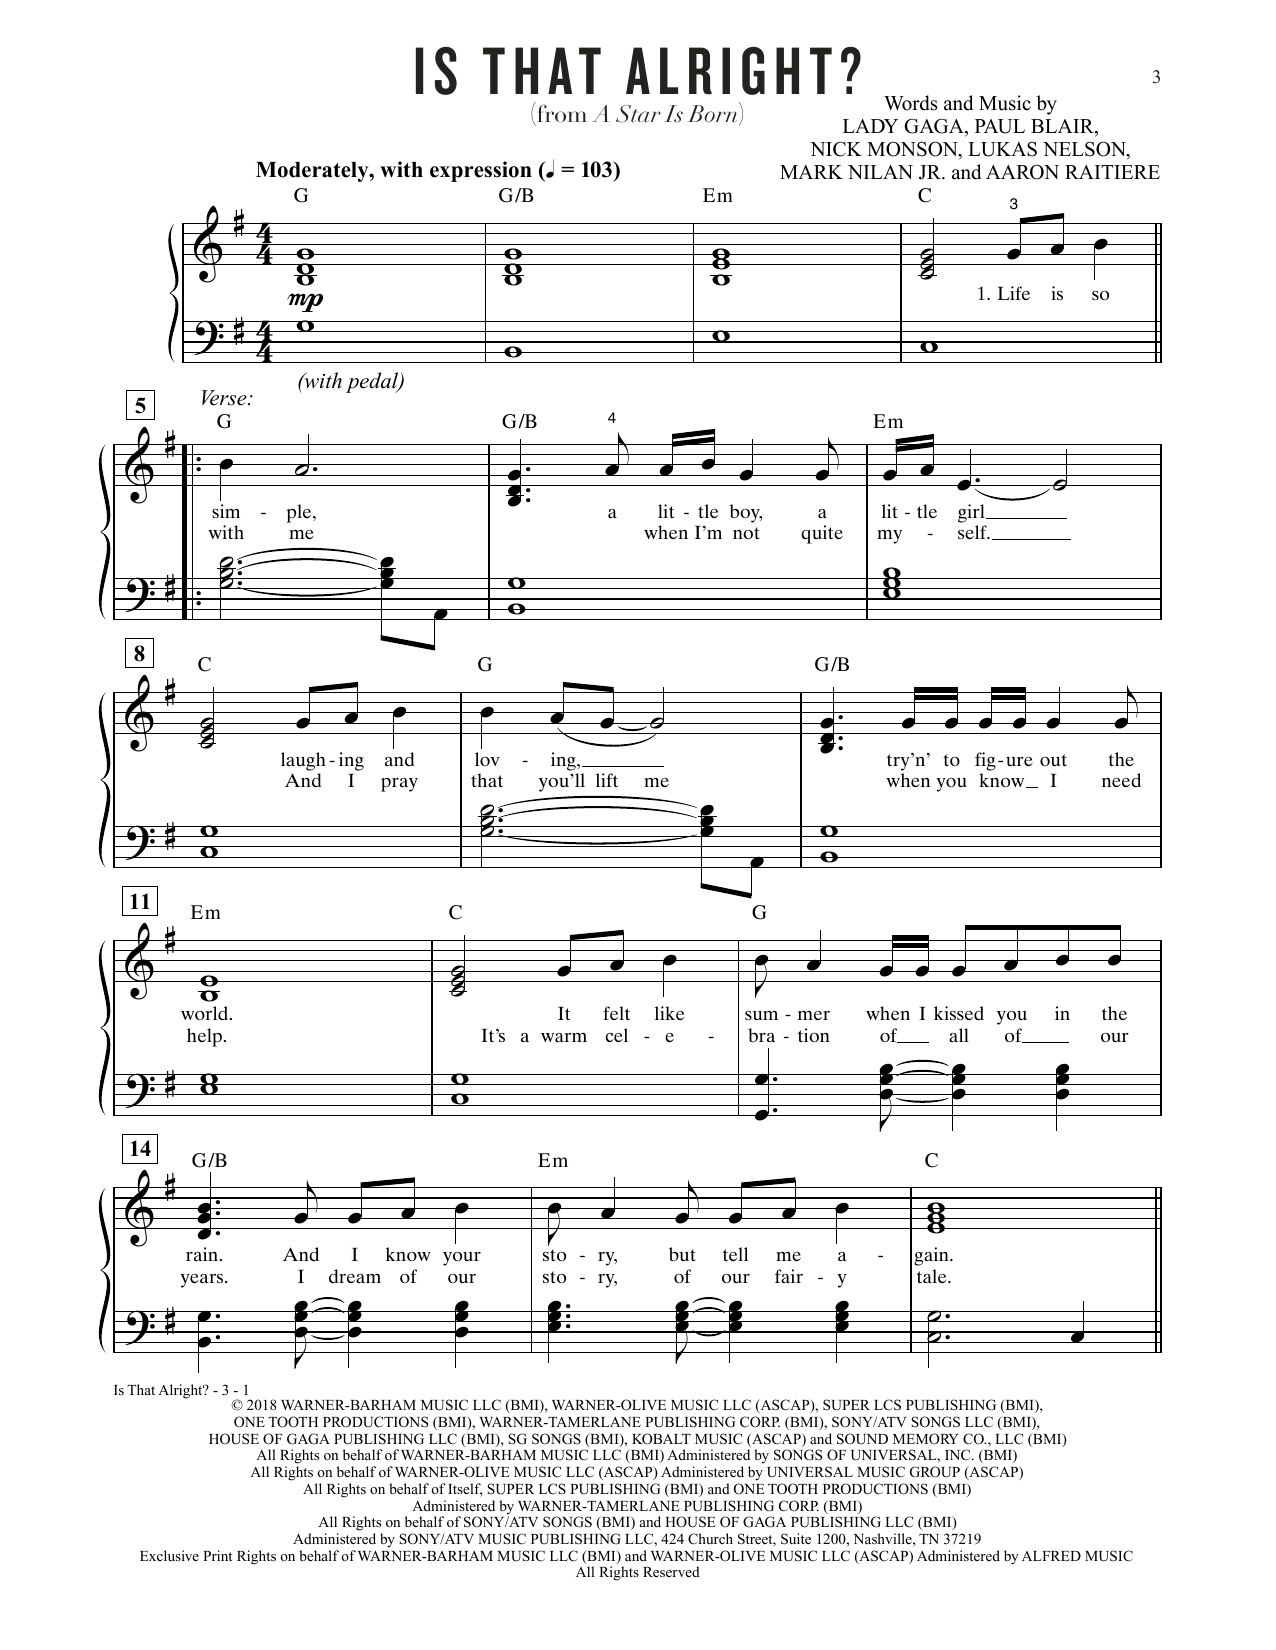 Download Lady Gaga Is That Alright? (from A Star Is Born) Sheet Music